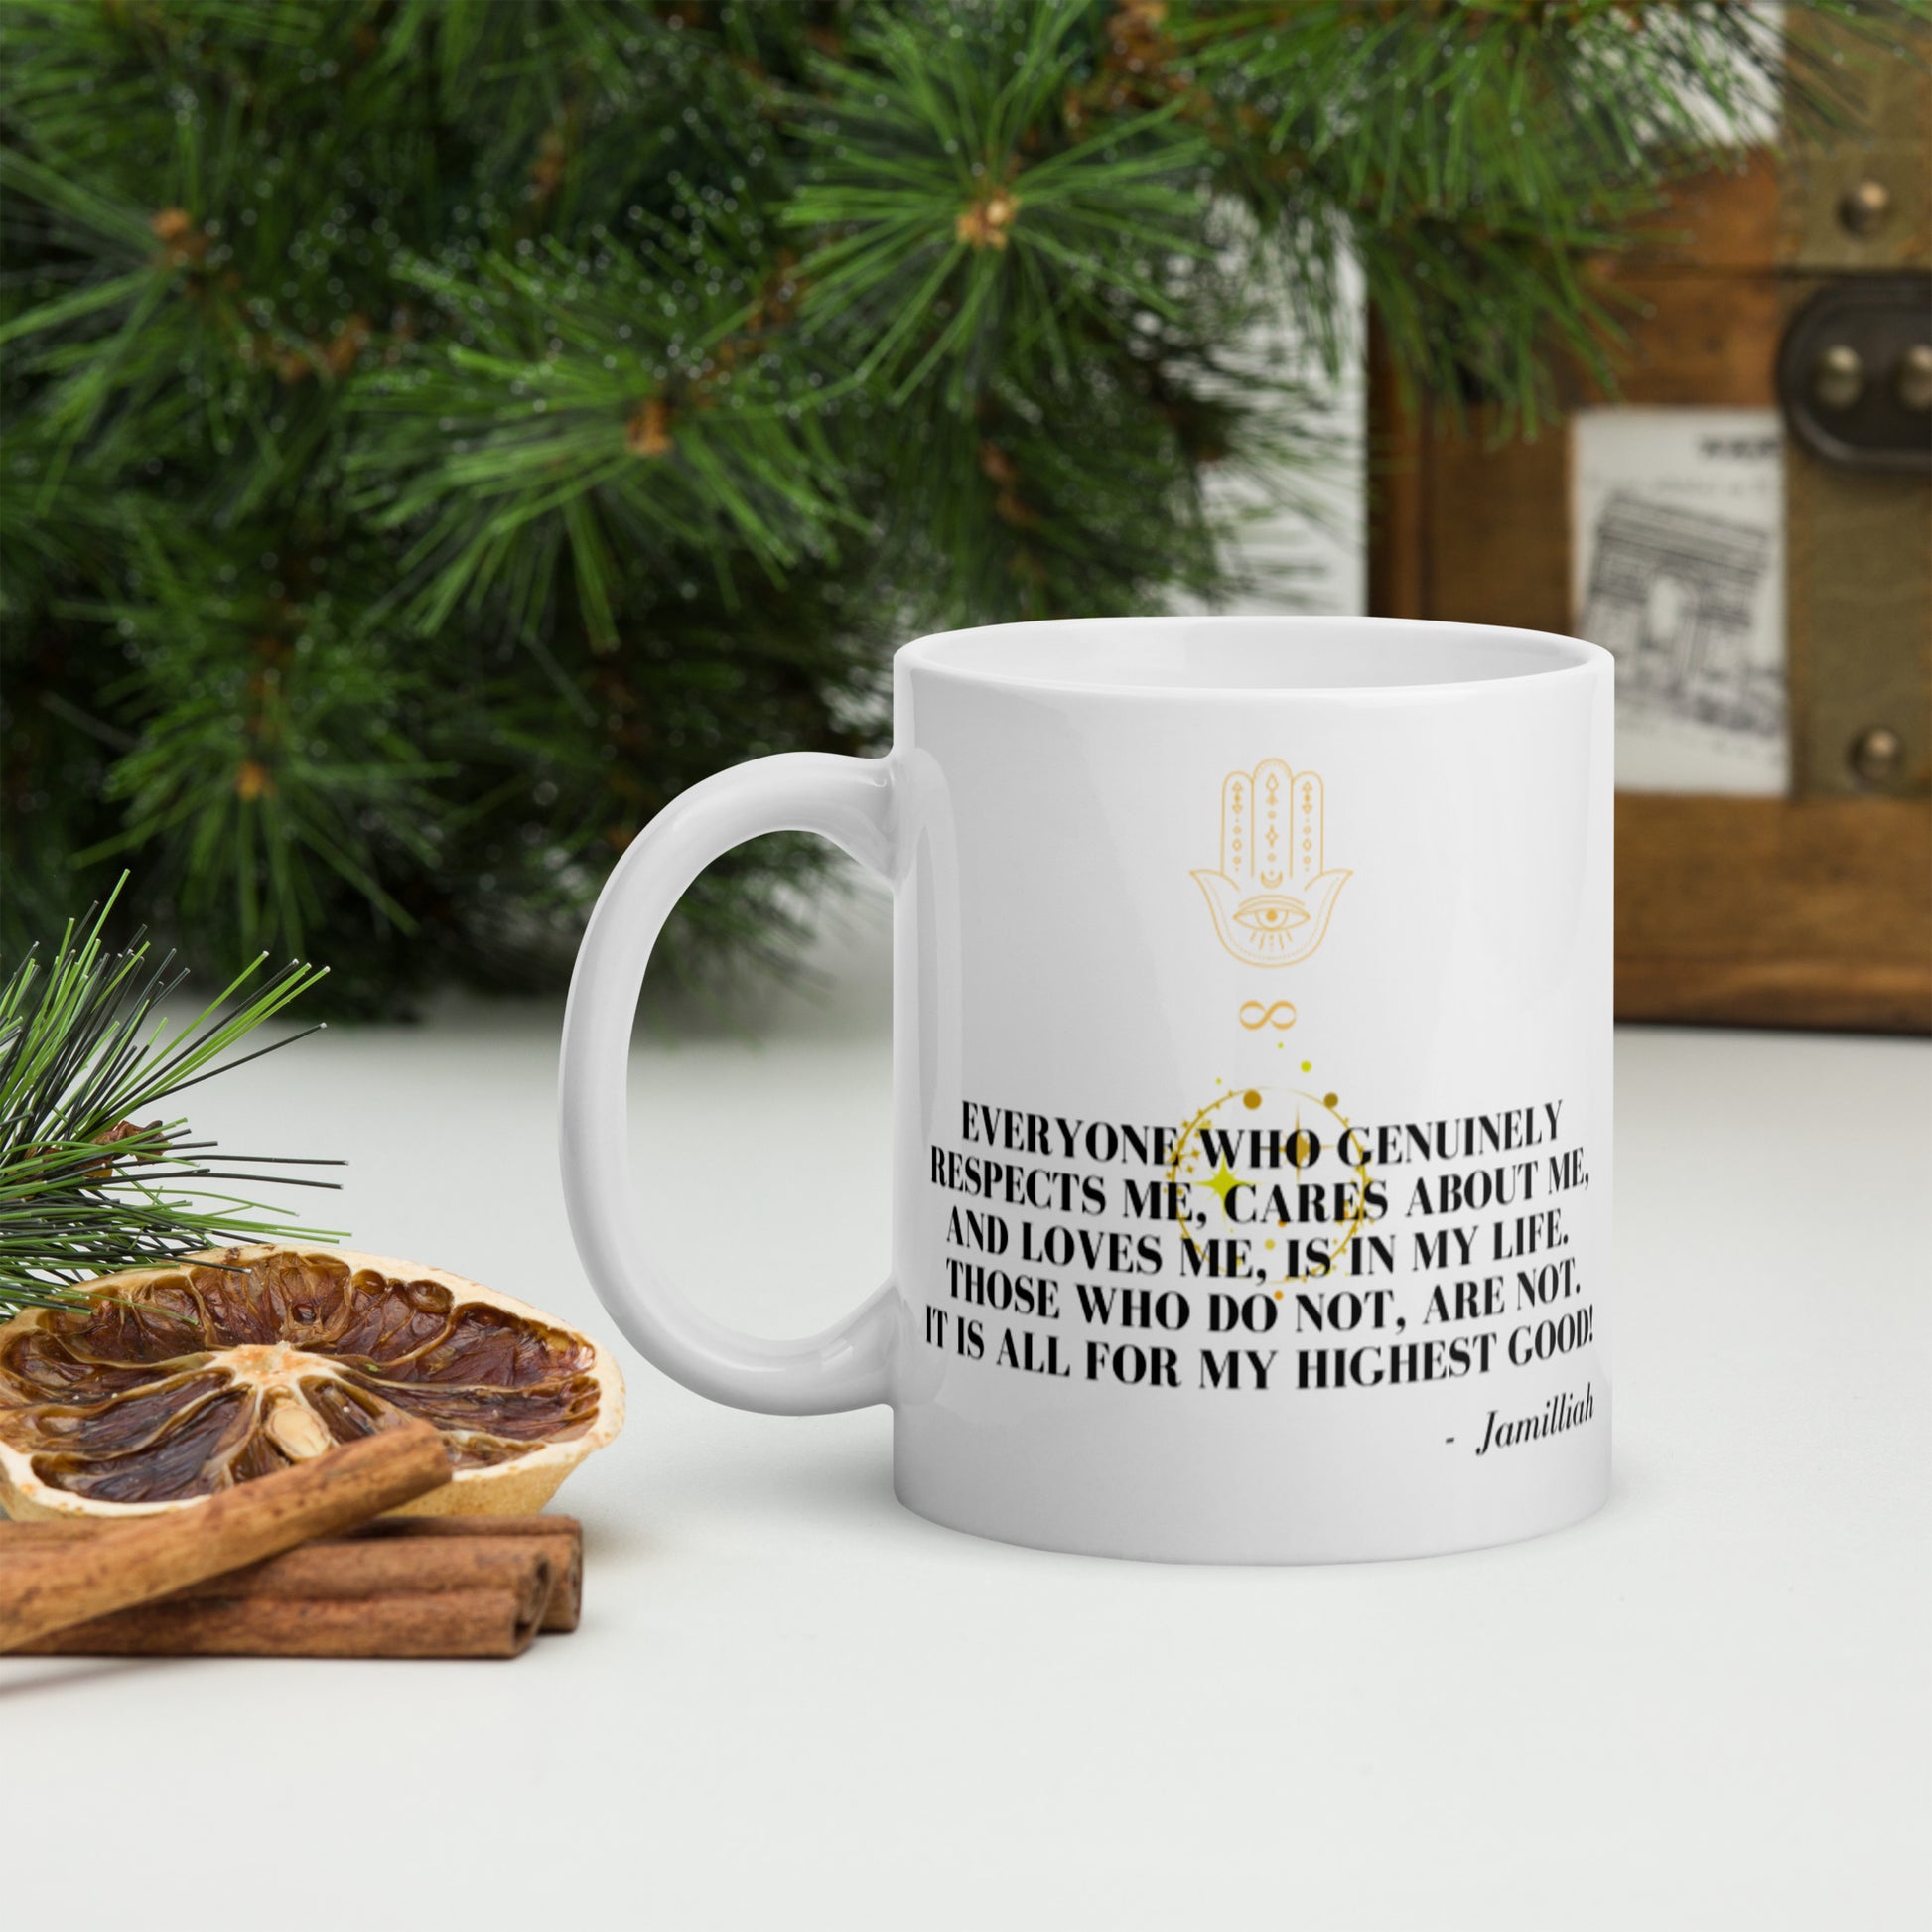 White glossy 11oz mug with original black and yellow design, logo, and inspirational quote, left handle. Spiritual, supernatural hamsa hand/infinity symbol logo. Wise quote mantra. "Everyone Who Genuinely Respects Me, Cares About Me, And Loves Me, Is In My Life. Those Who Do Not, Are Not. It Is All For My Highest Good!" - Jamilliah - Shown on counter with green tree and cinnamon. JAMILLIAH'S WISDOM IS TIMELESS SHOP - wisdomistimeless.com.